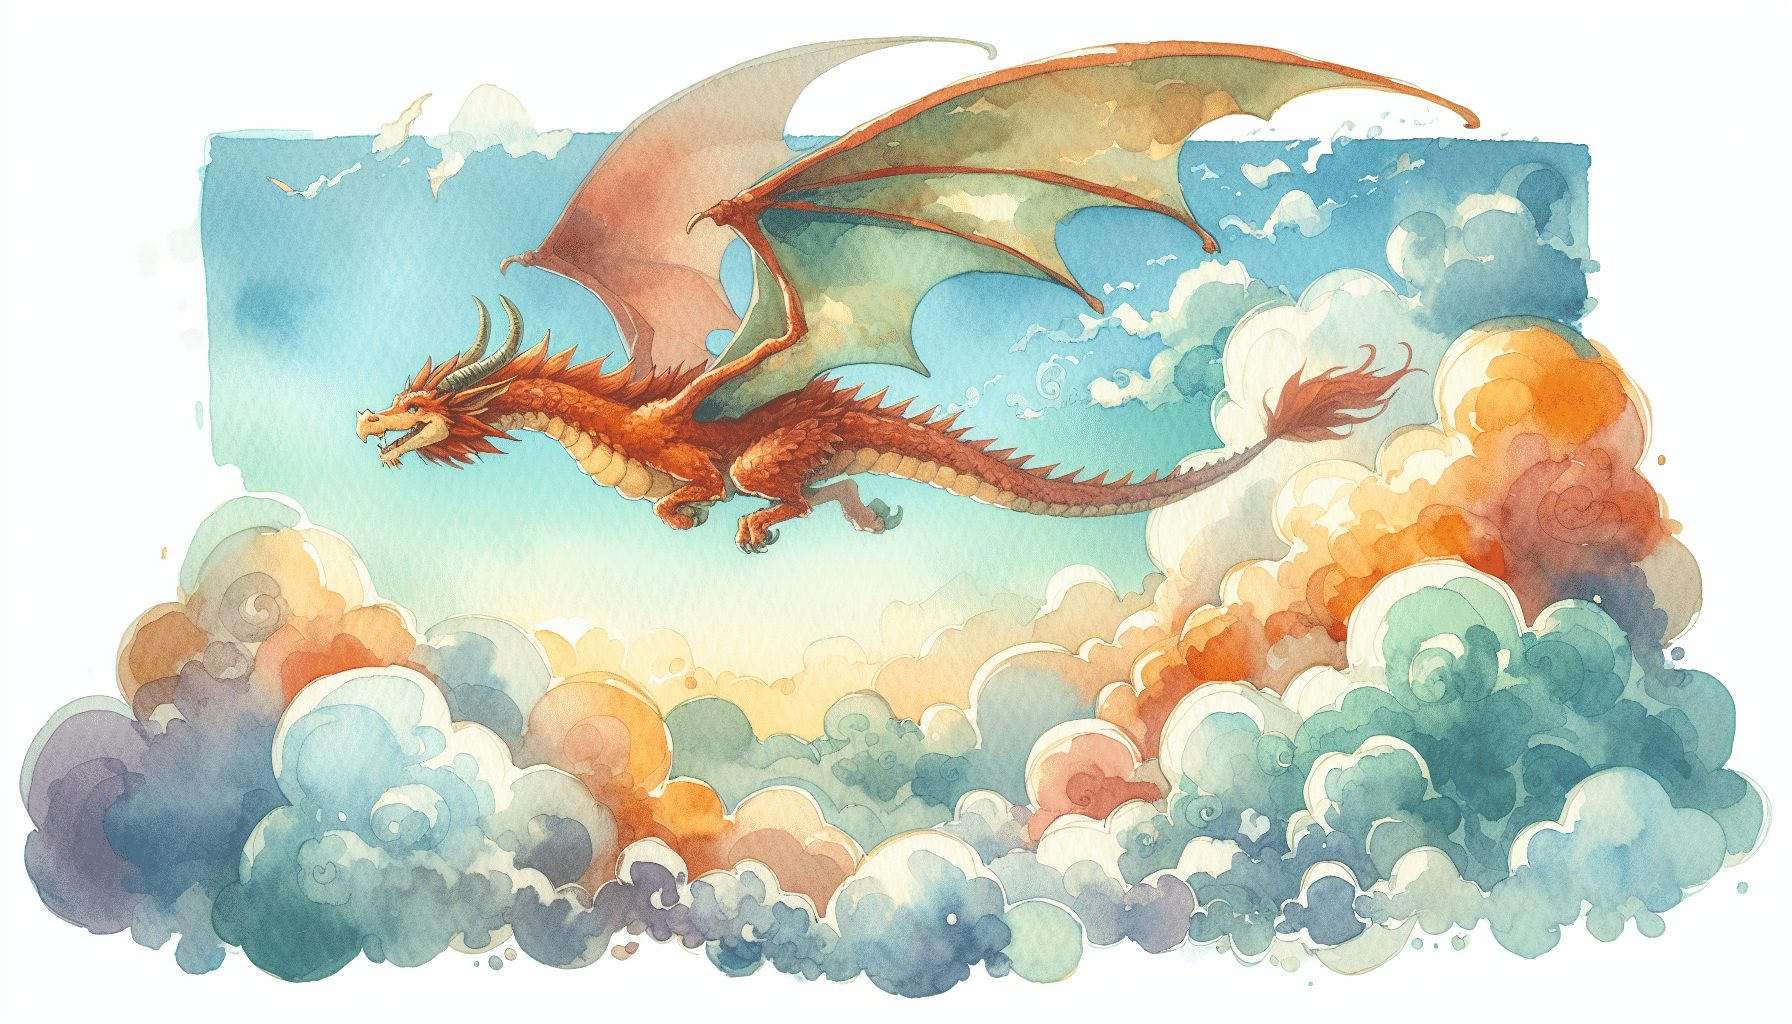 Dragons Flight Soaring Above the Clouds